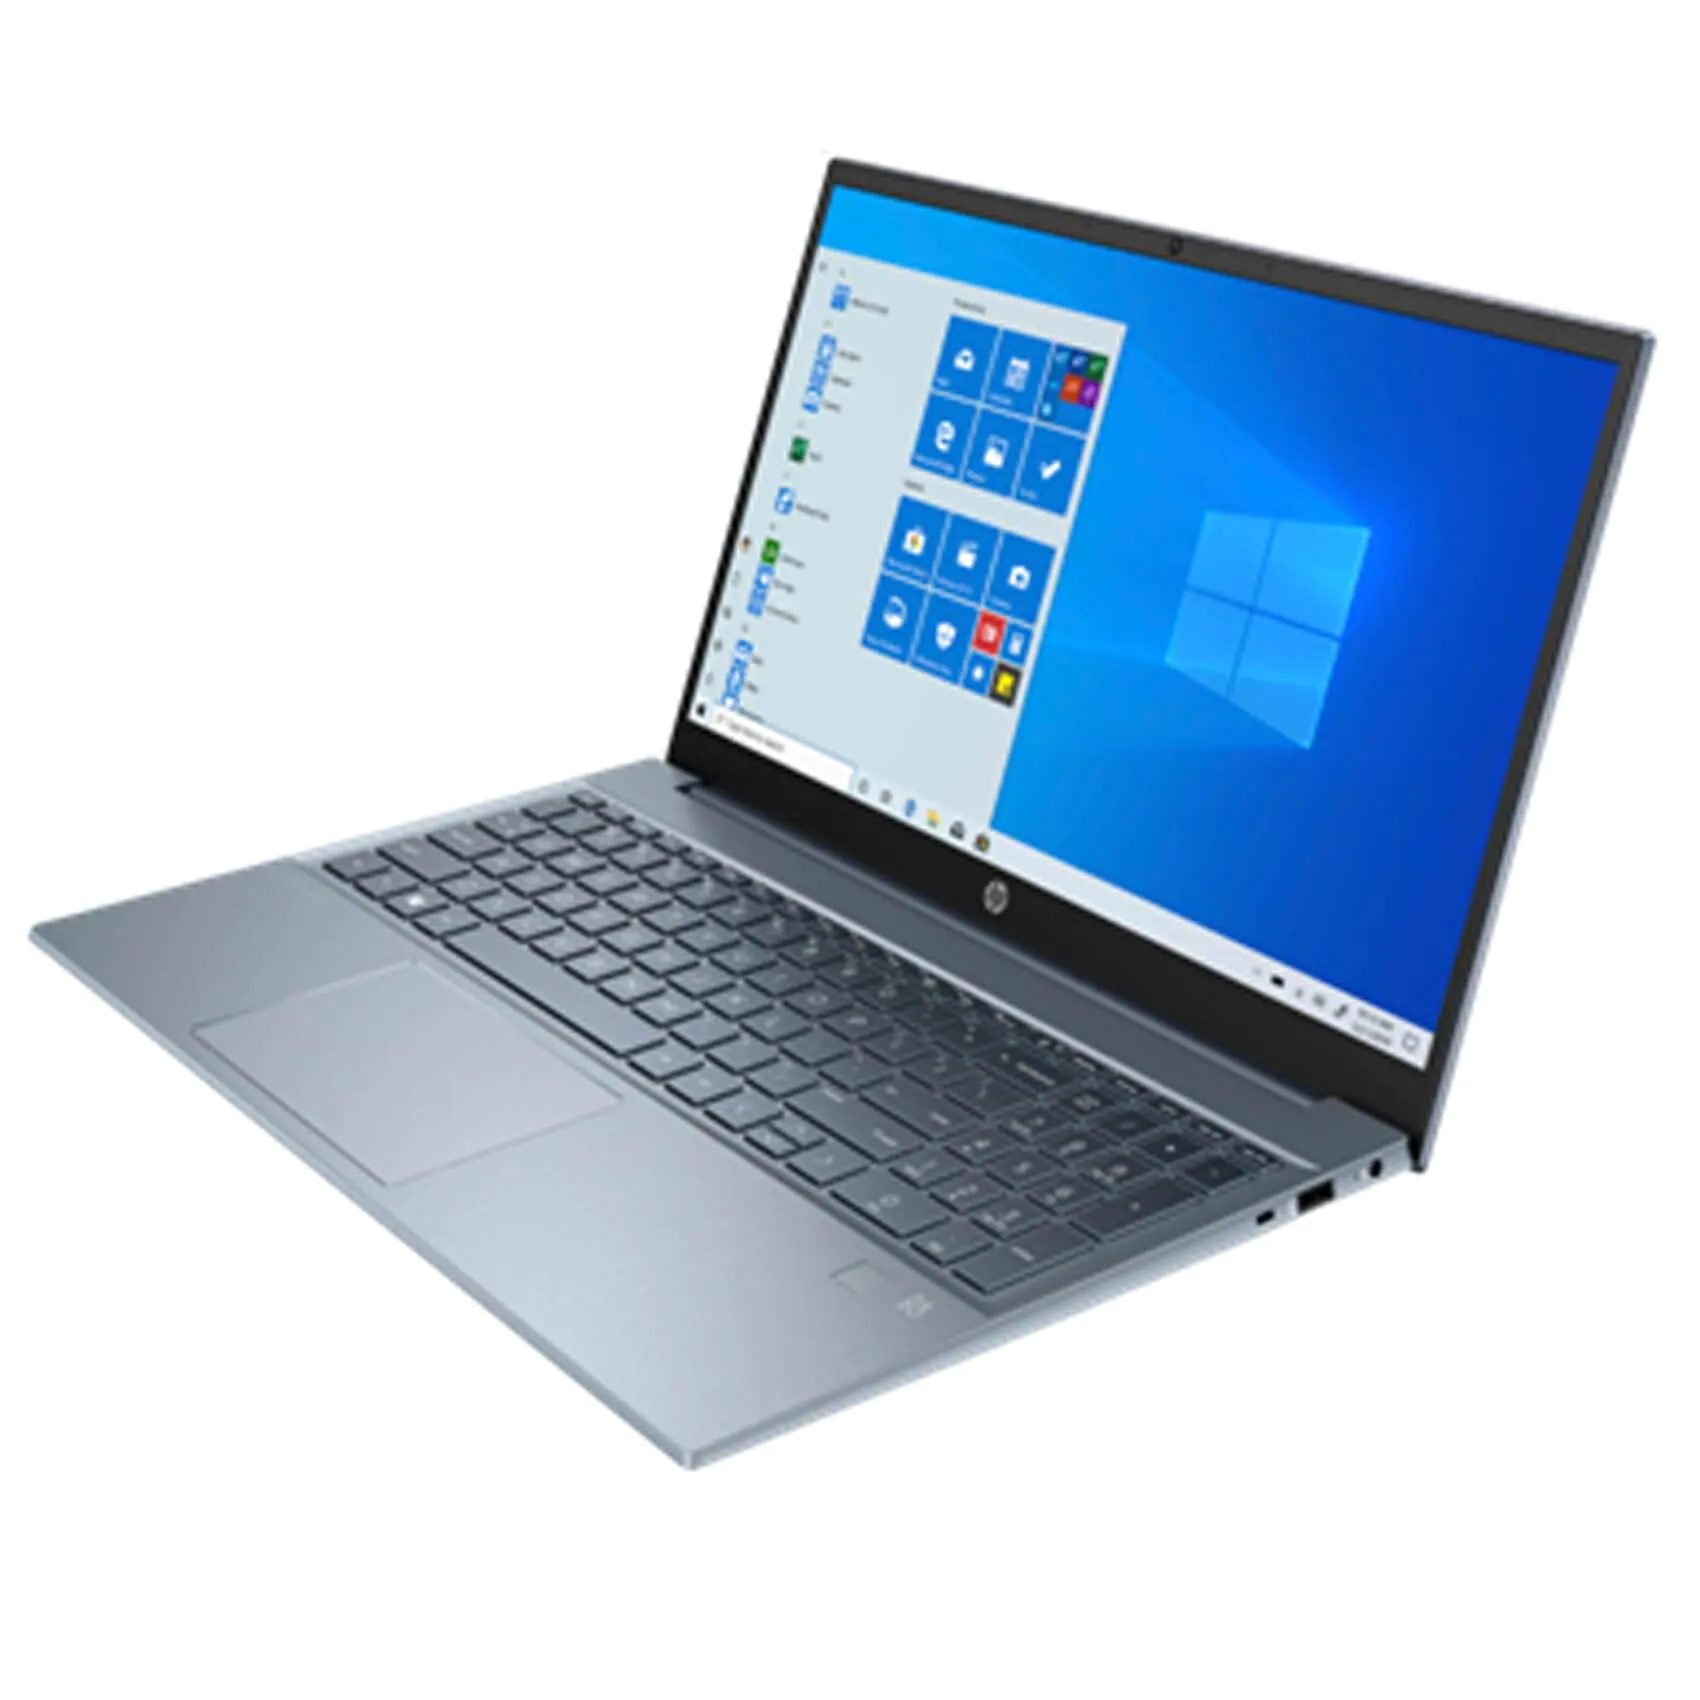 Laptops Promotions offer - in Amman #2075 - 1  image 